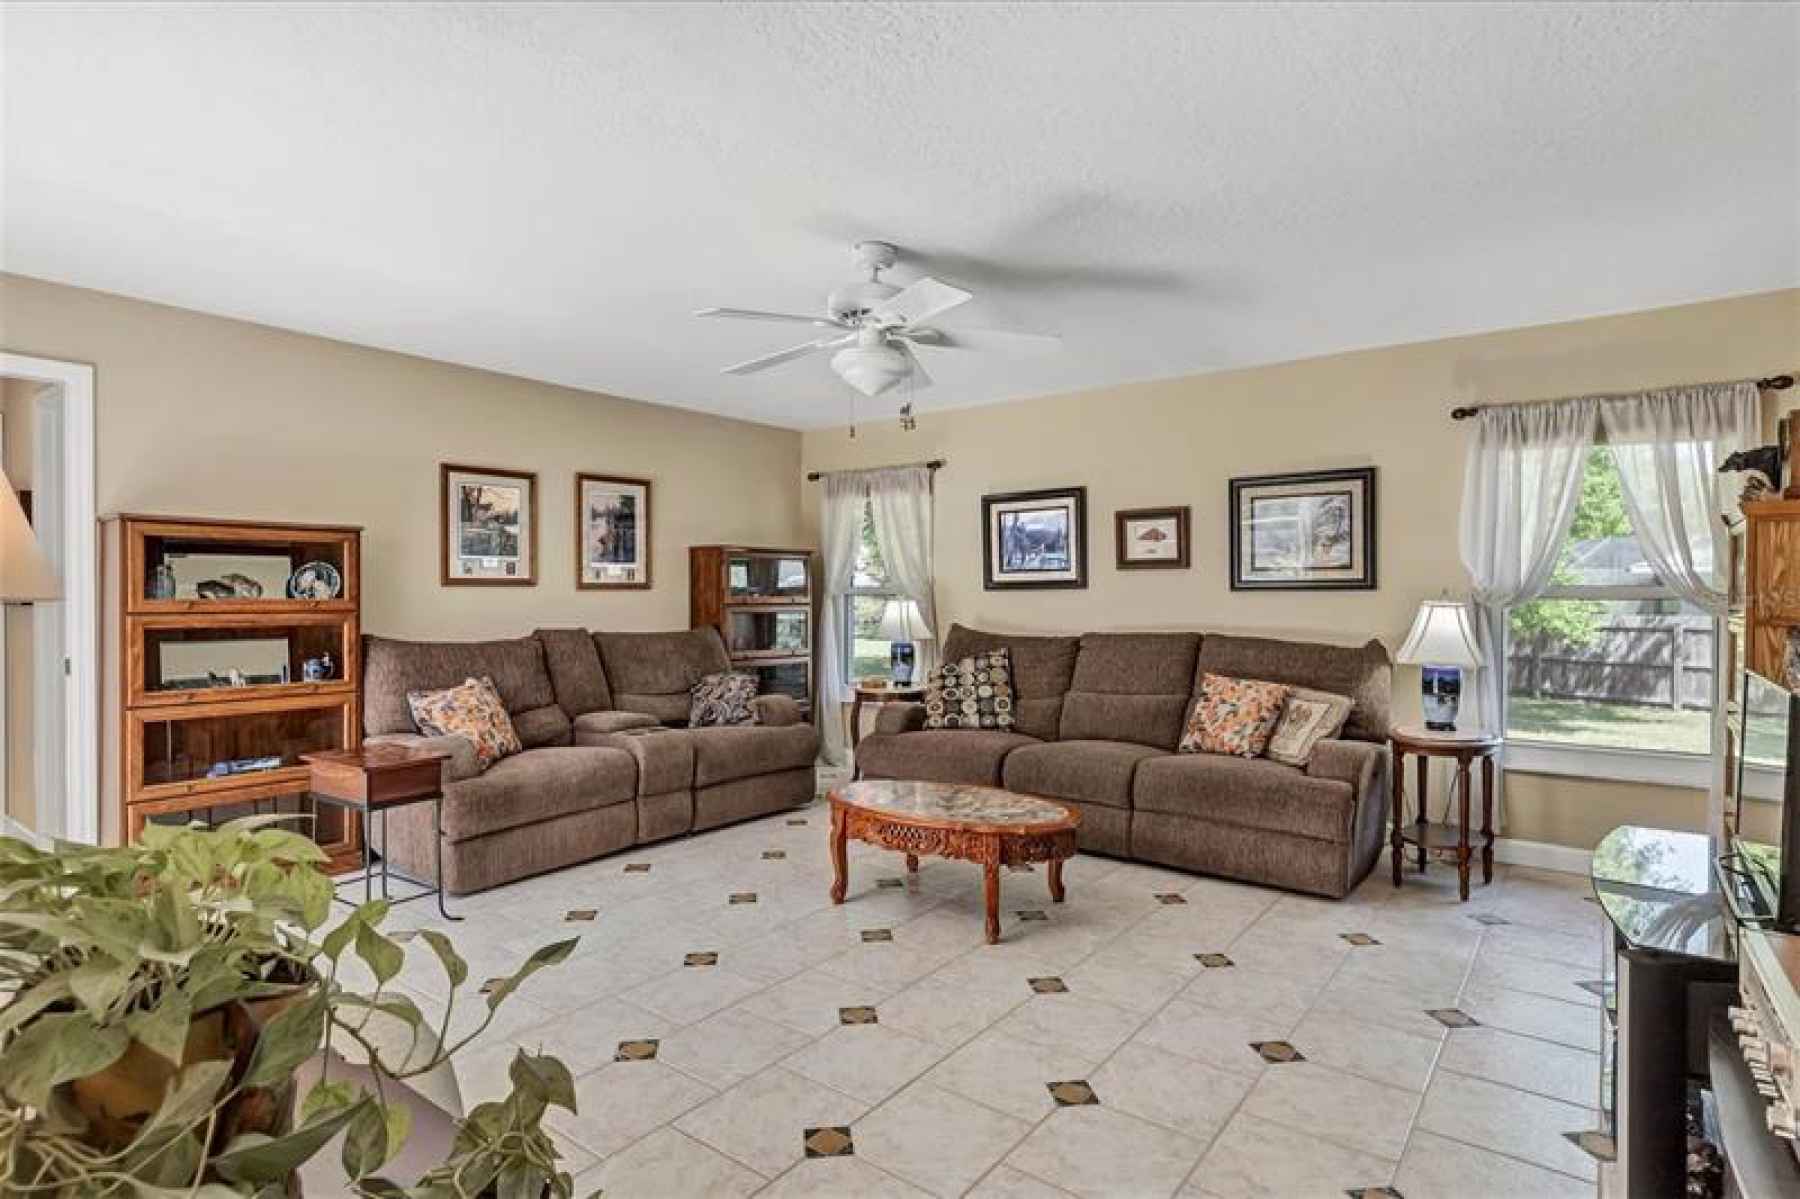 A large spacious family room offers plenty of seating space